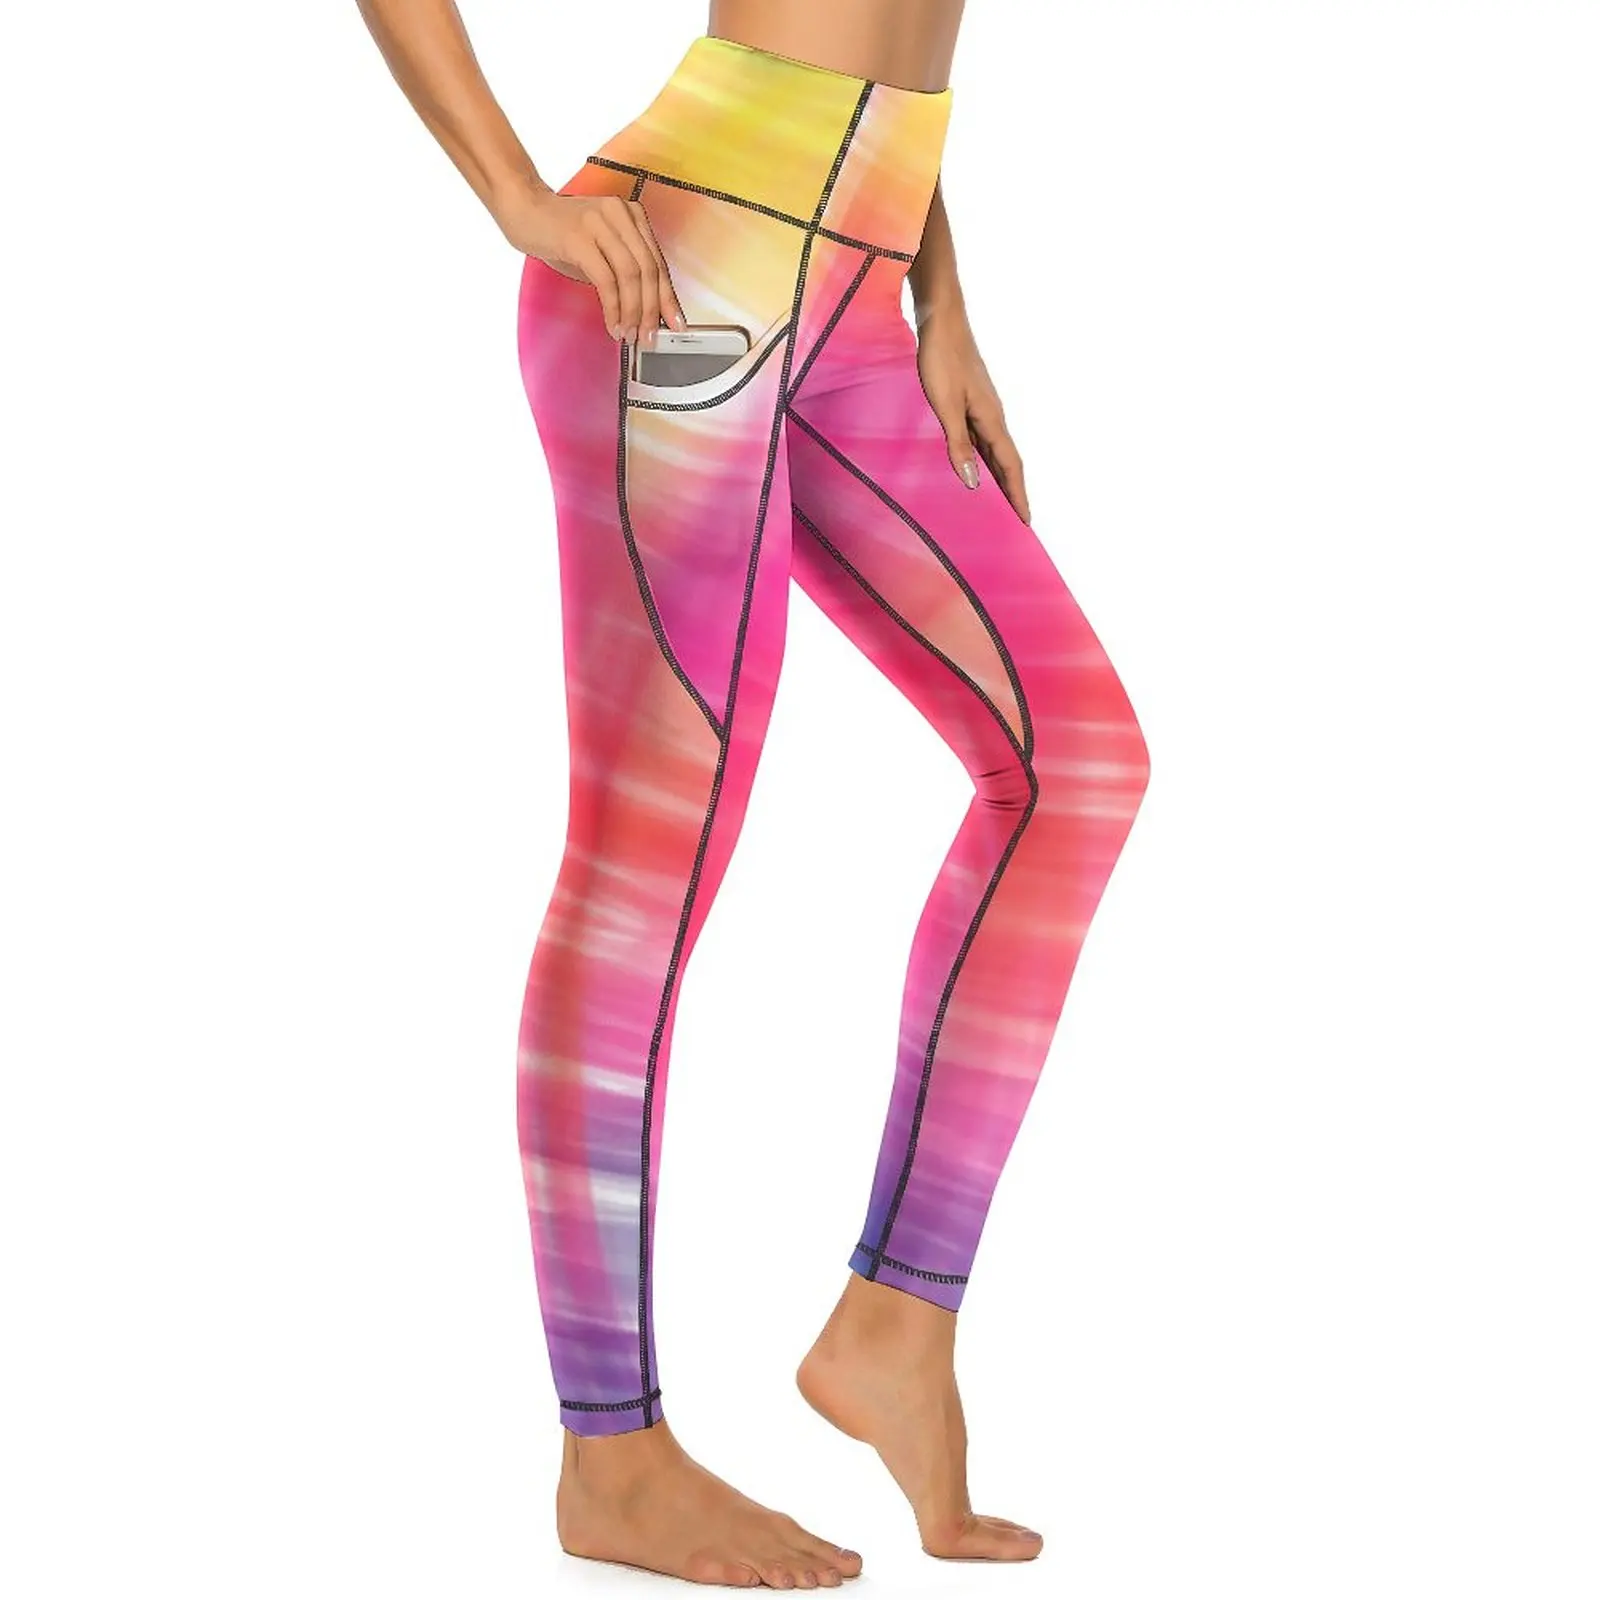 

Curving Tie Dye Leggings Abstract Ombre Fitness Yoga Pants Lady High Waist Retro Leggins Sexy Quick-Dry Graphic Sports Tights